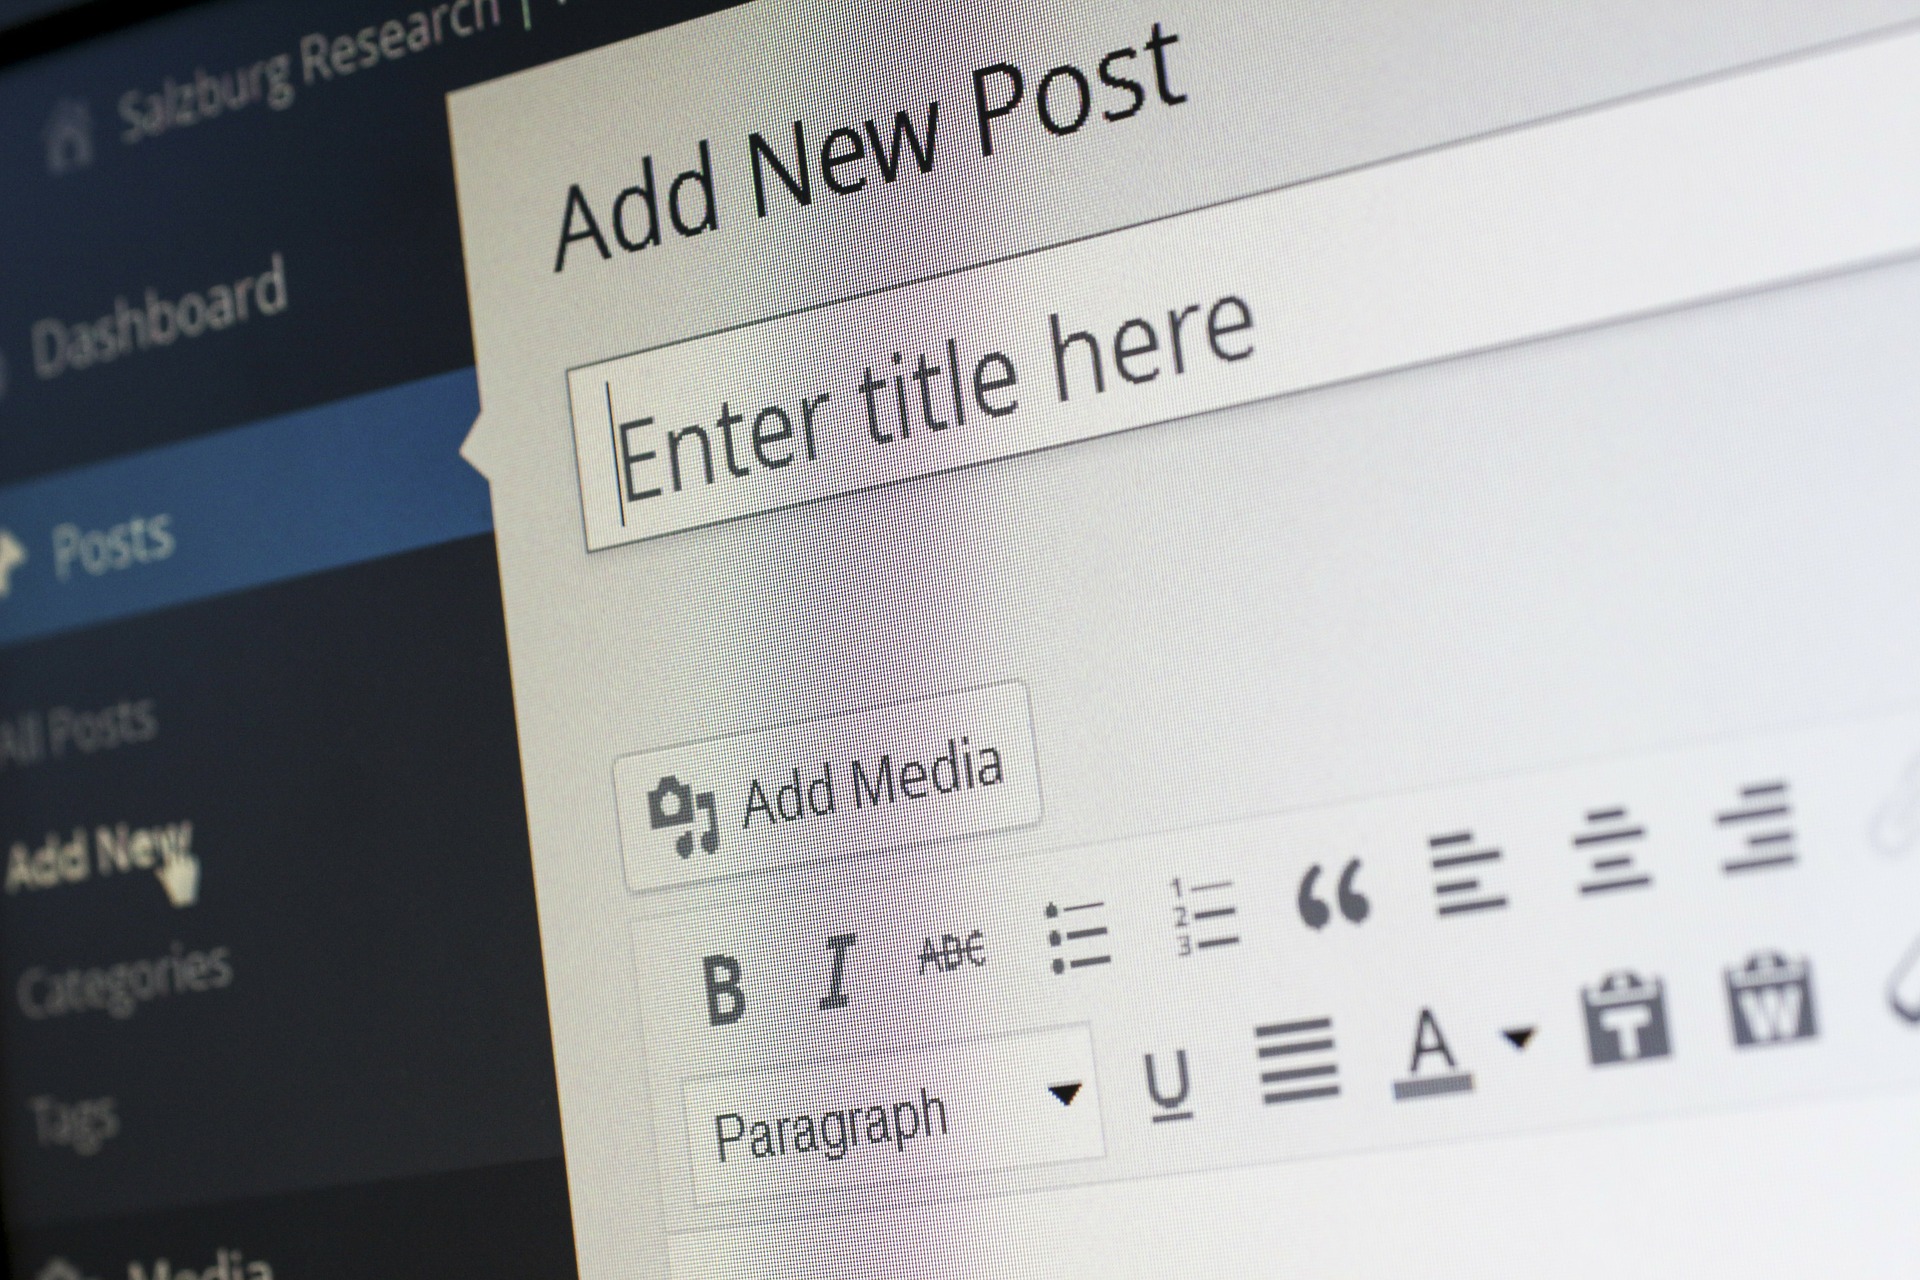 WordPress blogs offer easy ways to generate content.